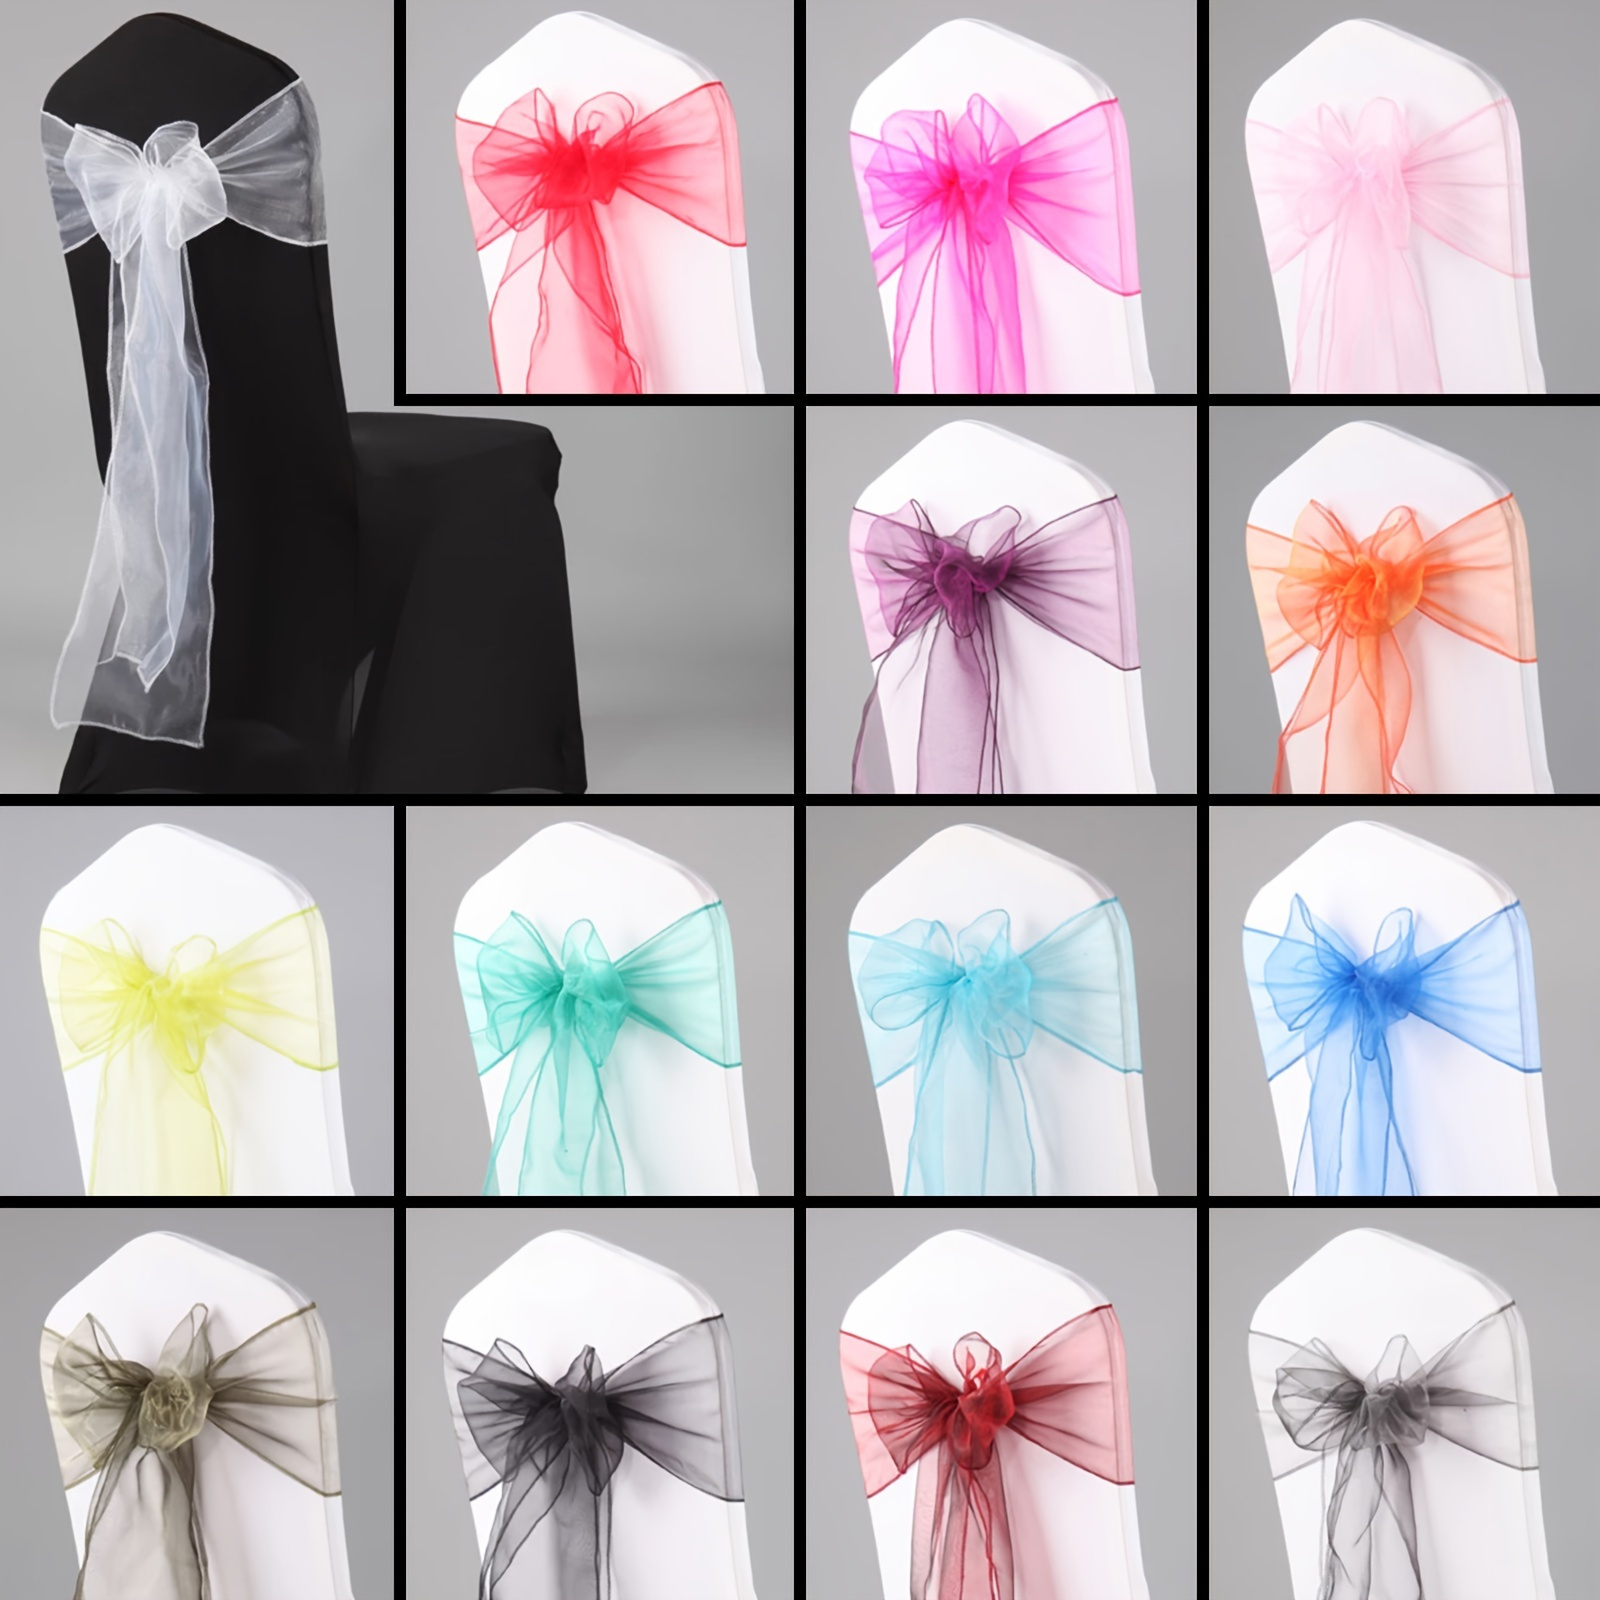 

10pcs Wide Organza Chair Sashes For Weddings And Parties - Elegant And Durable Home Decor